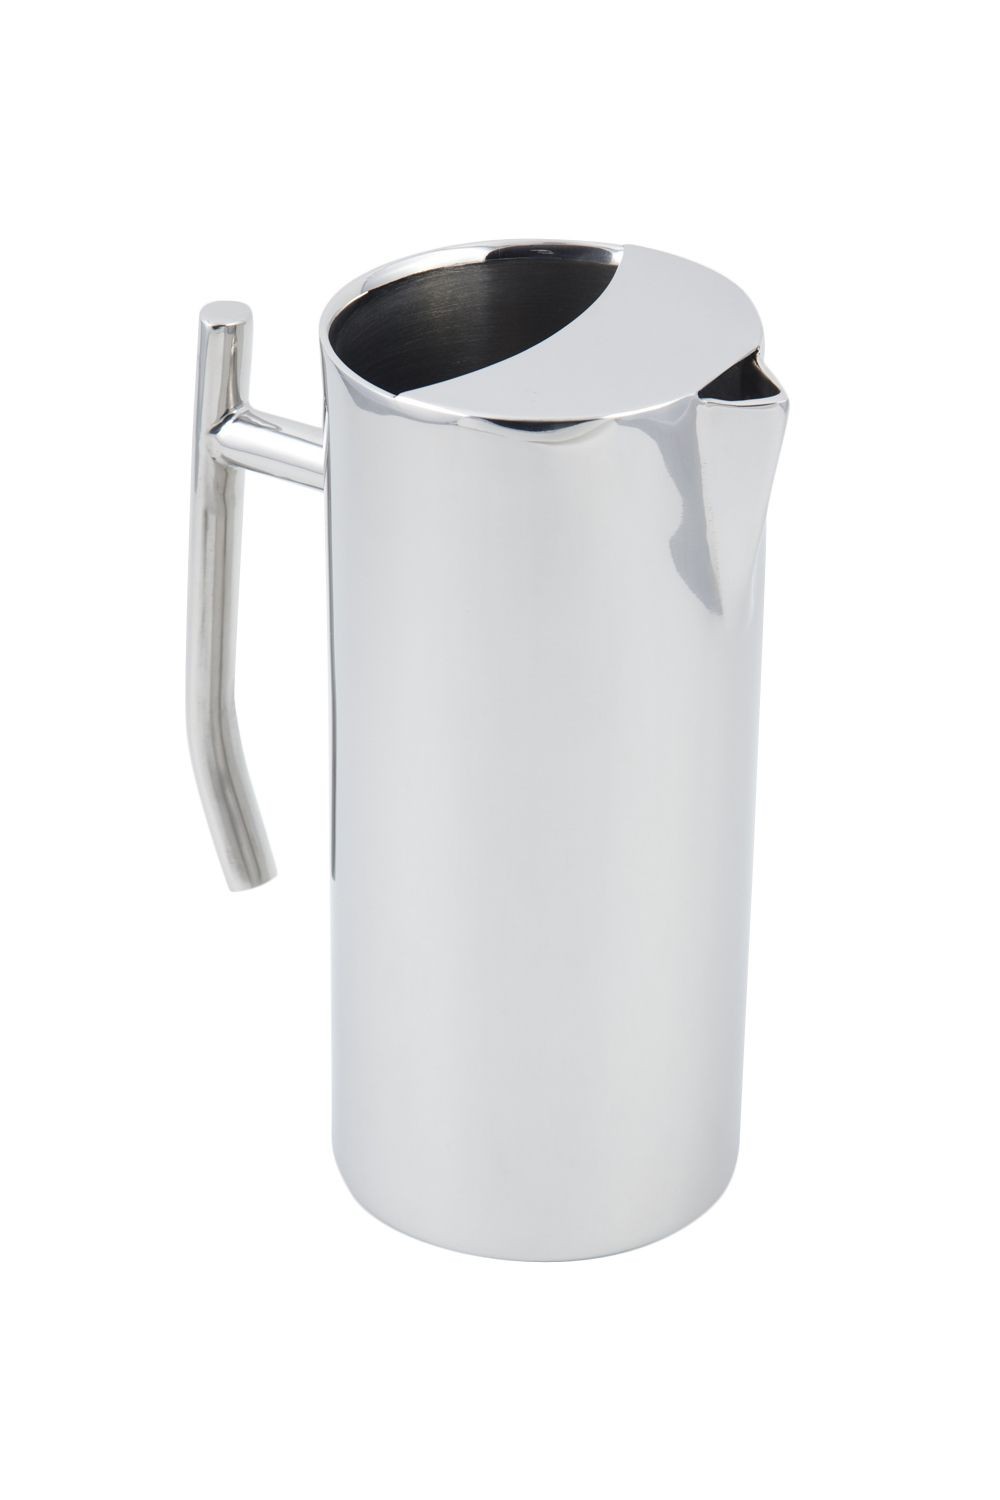 Winco WPC-48 48 oz Water Pitcher